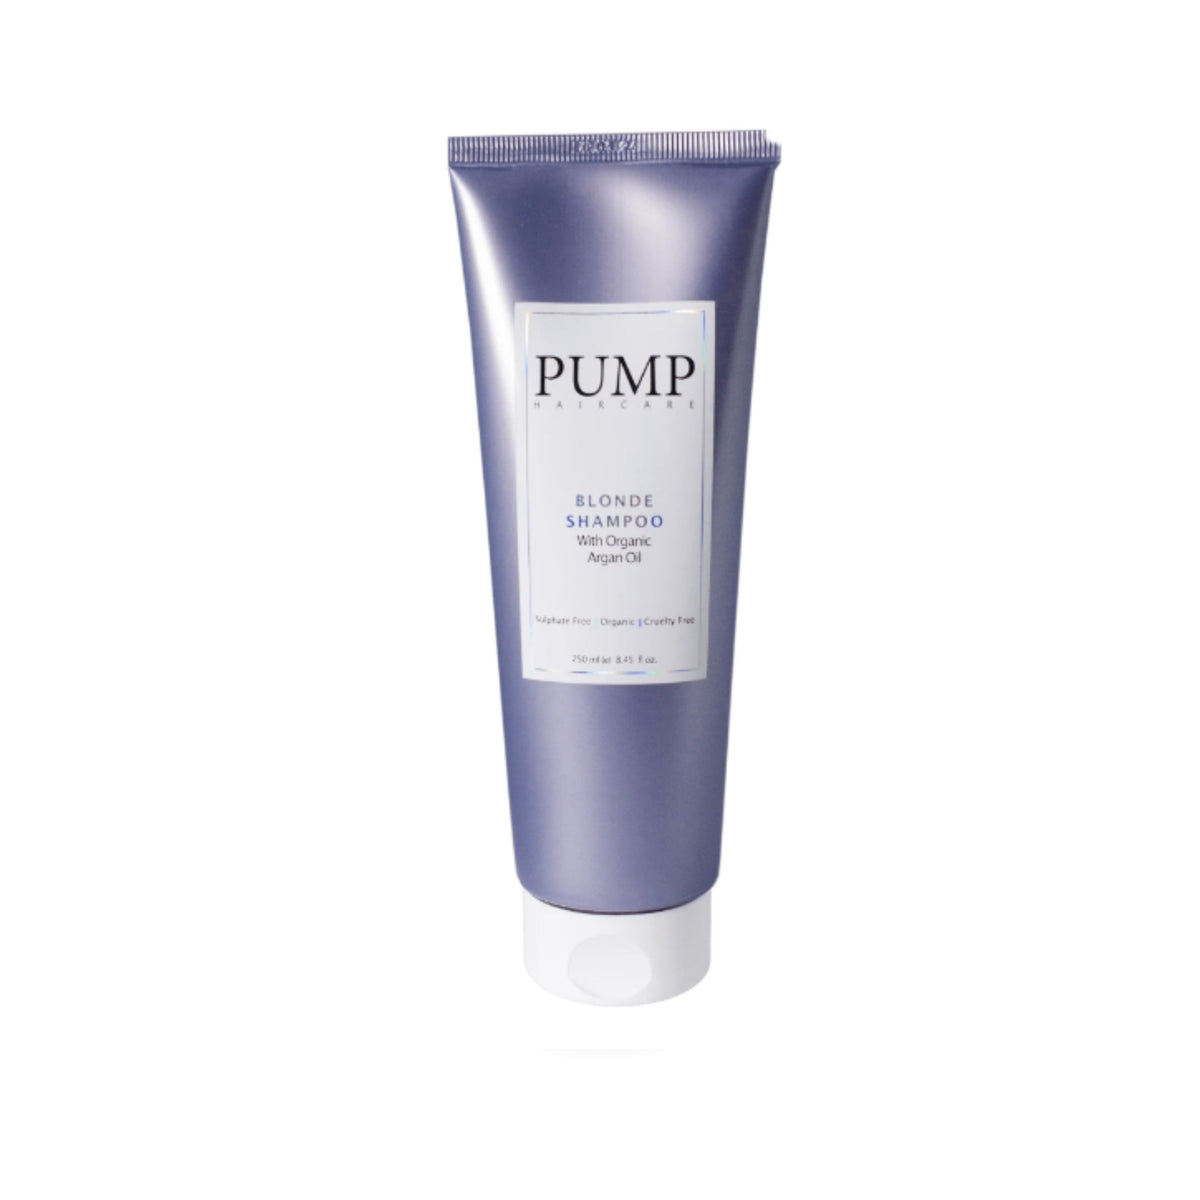 Pump Blonde Shampoo - Haircare Superstore